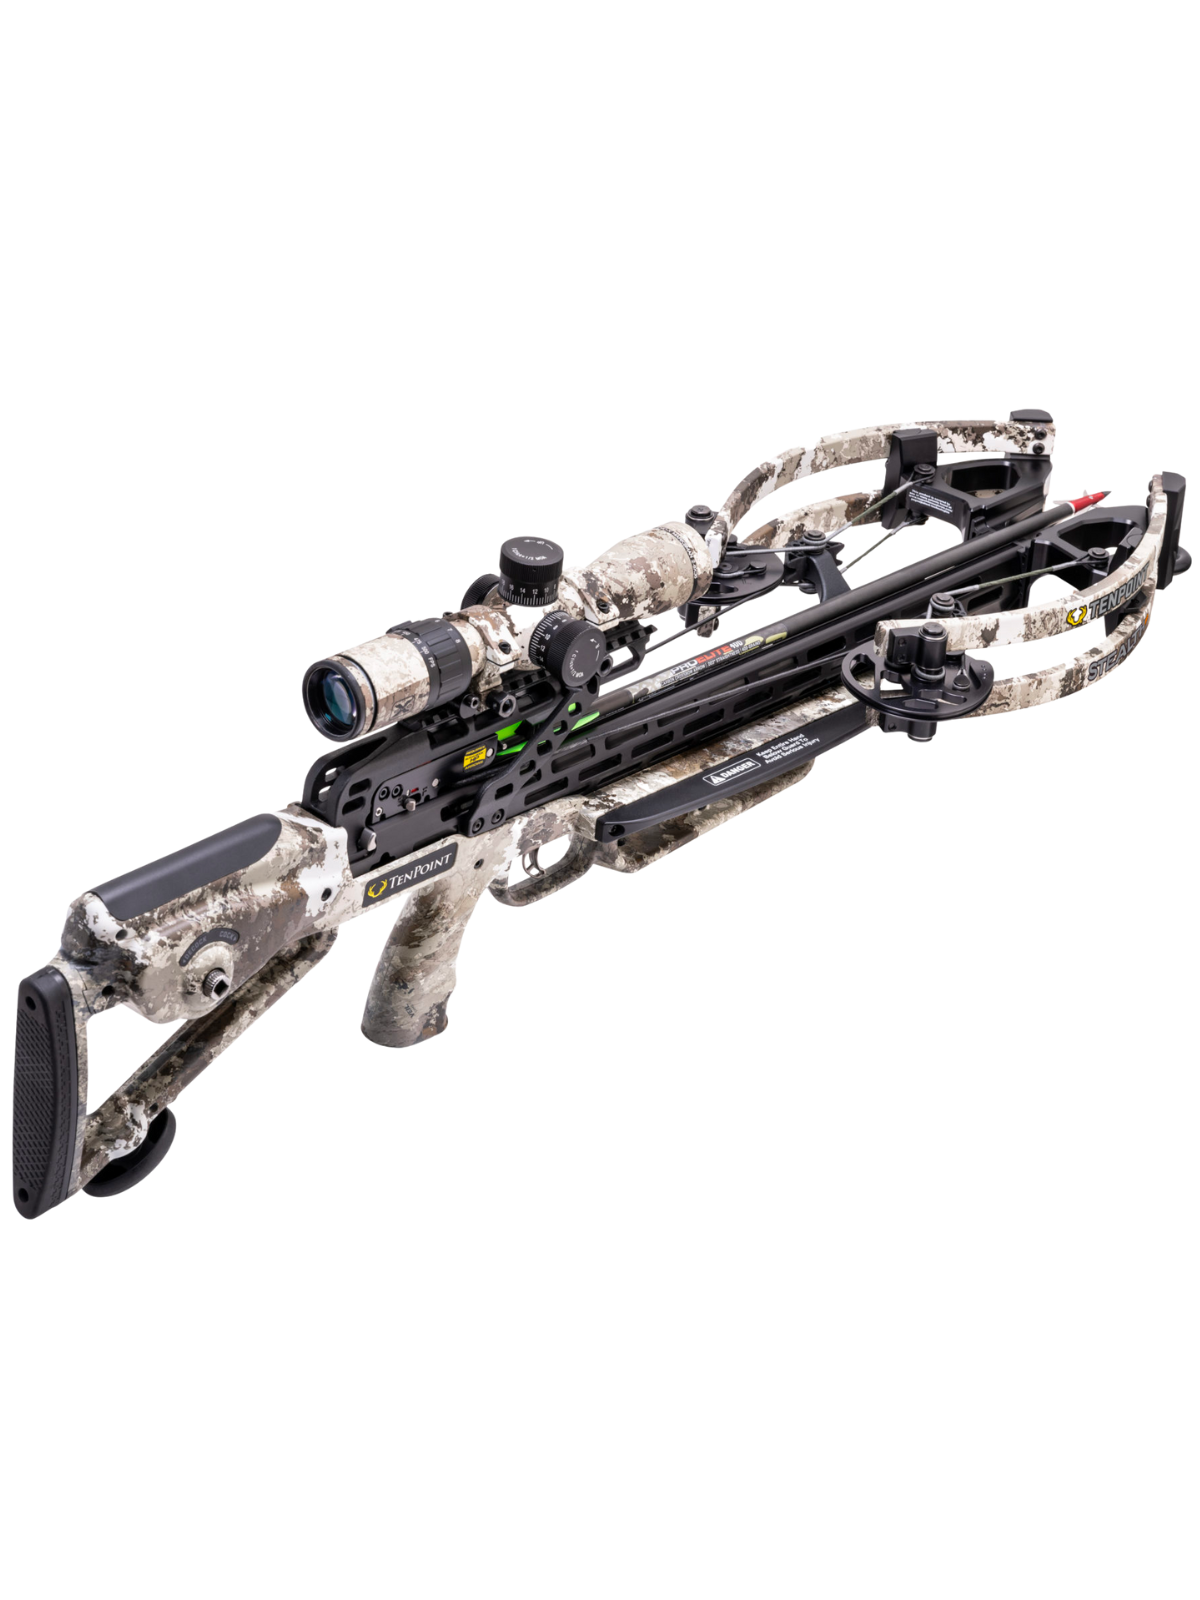 TenPoint Stealth 450 ACUslide Evo-X Elite Compound Crossbow Package